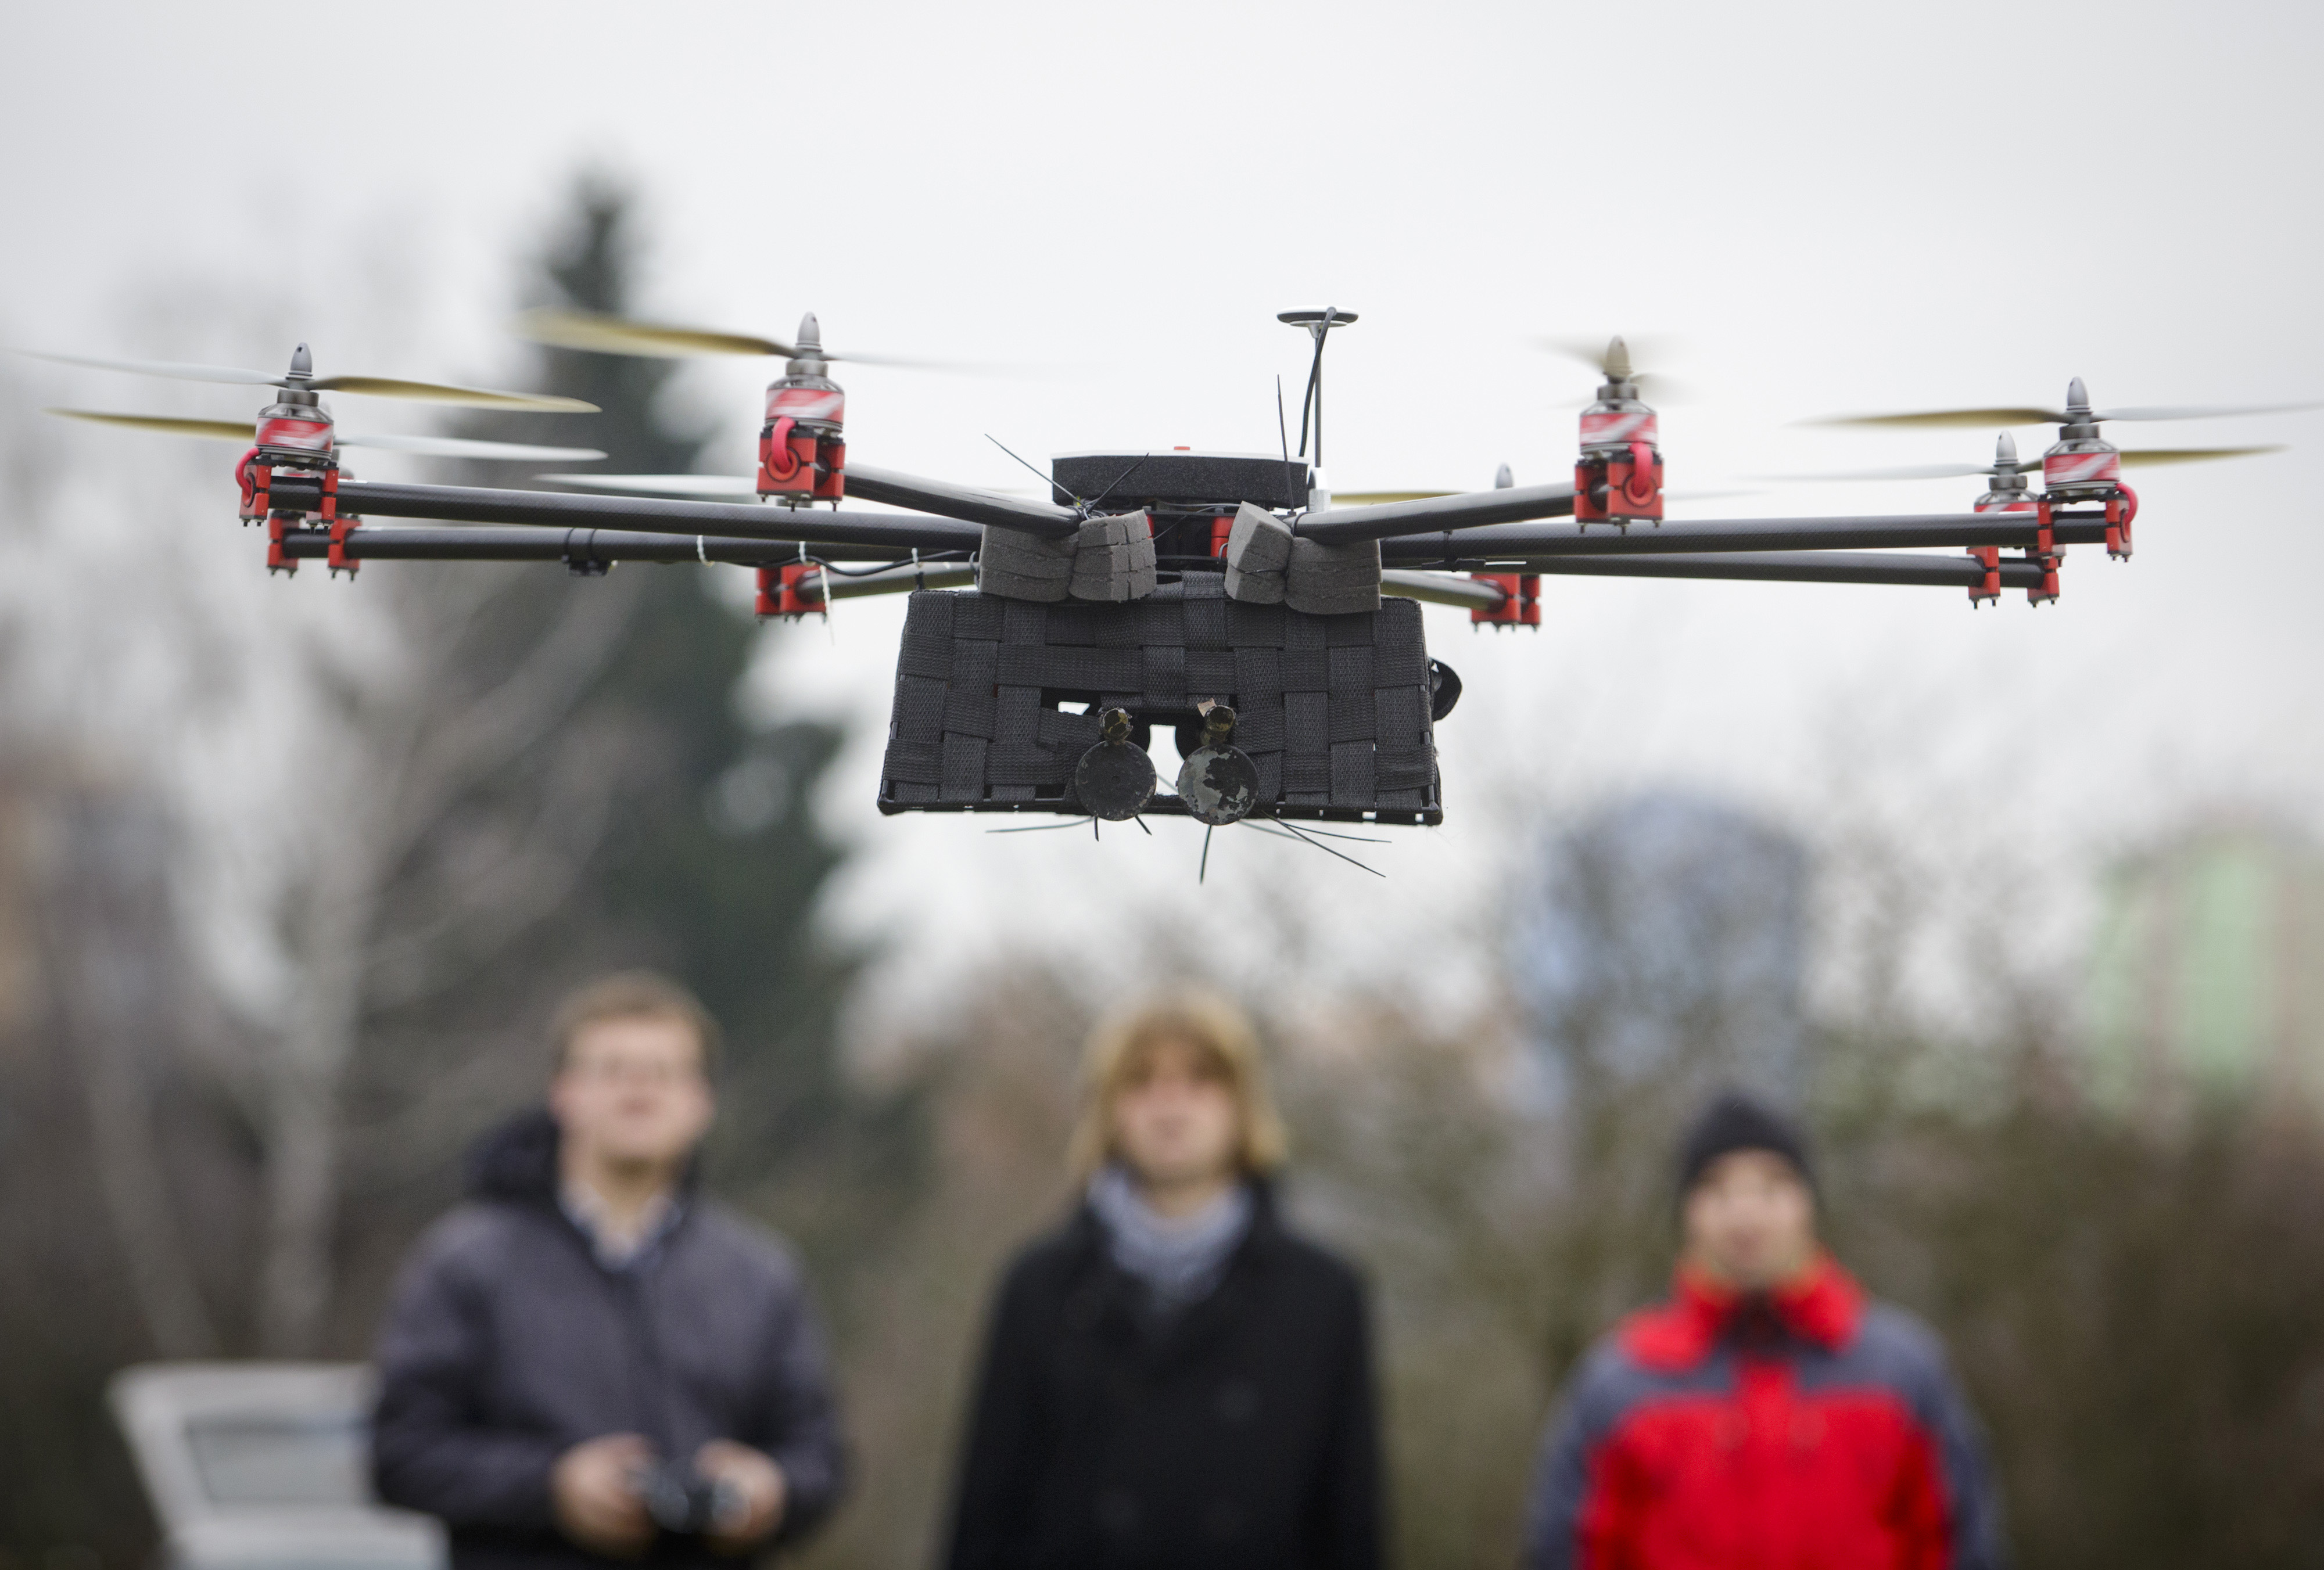 Technicians look on as a SteadiDrone EI8GHT Octocopter hovers during a test flight in a field outside the headquarters of Mensuro Ltd., a distributor for SteadiDrone Ltd. products, in Pilsen, Czech Republic, on Tuesday, Dec. 10, 2013. (Bloomberg—Bloomberg /Getty Images)